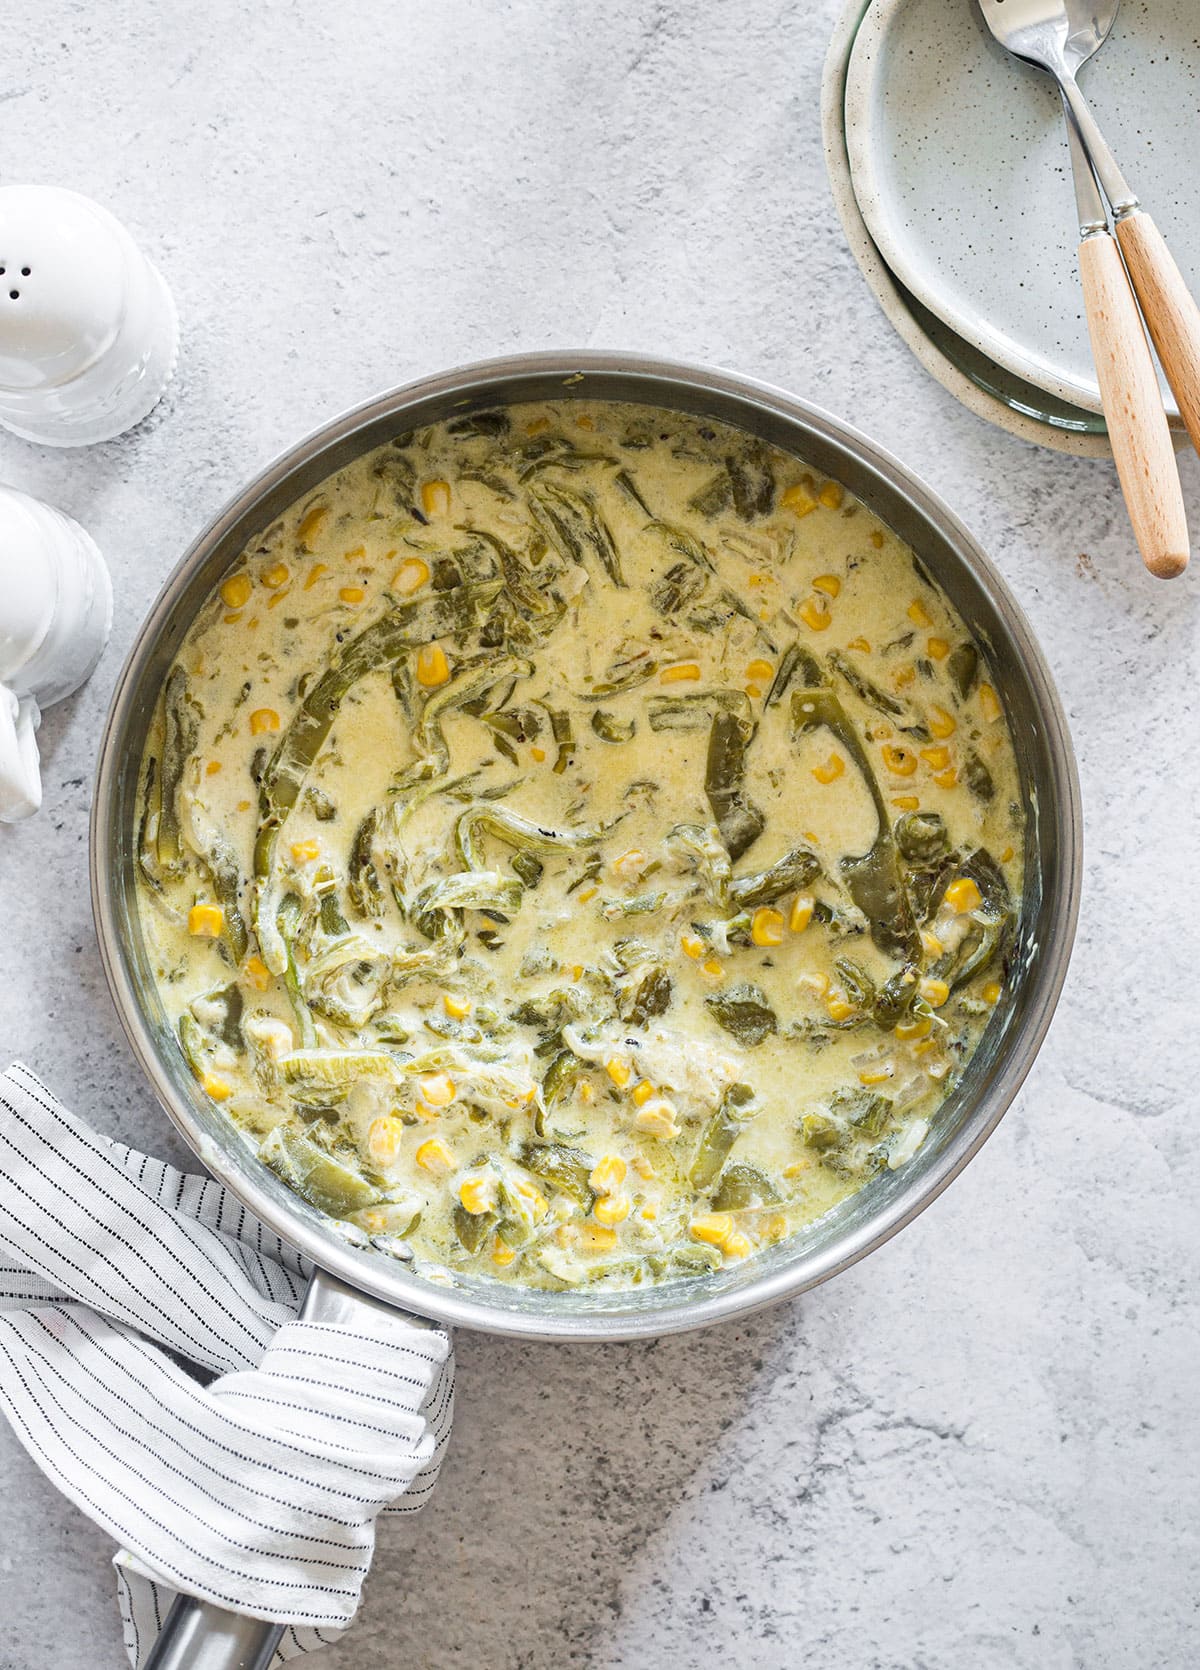 Rajas con crema in a pan. Seen from above.